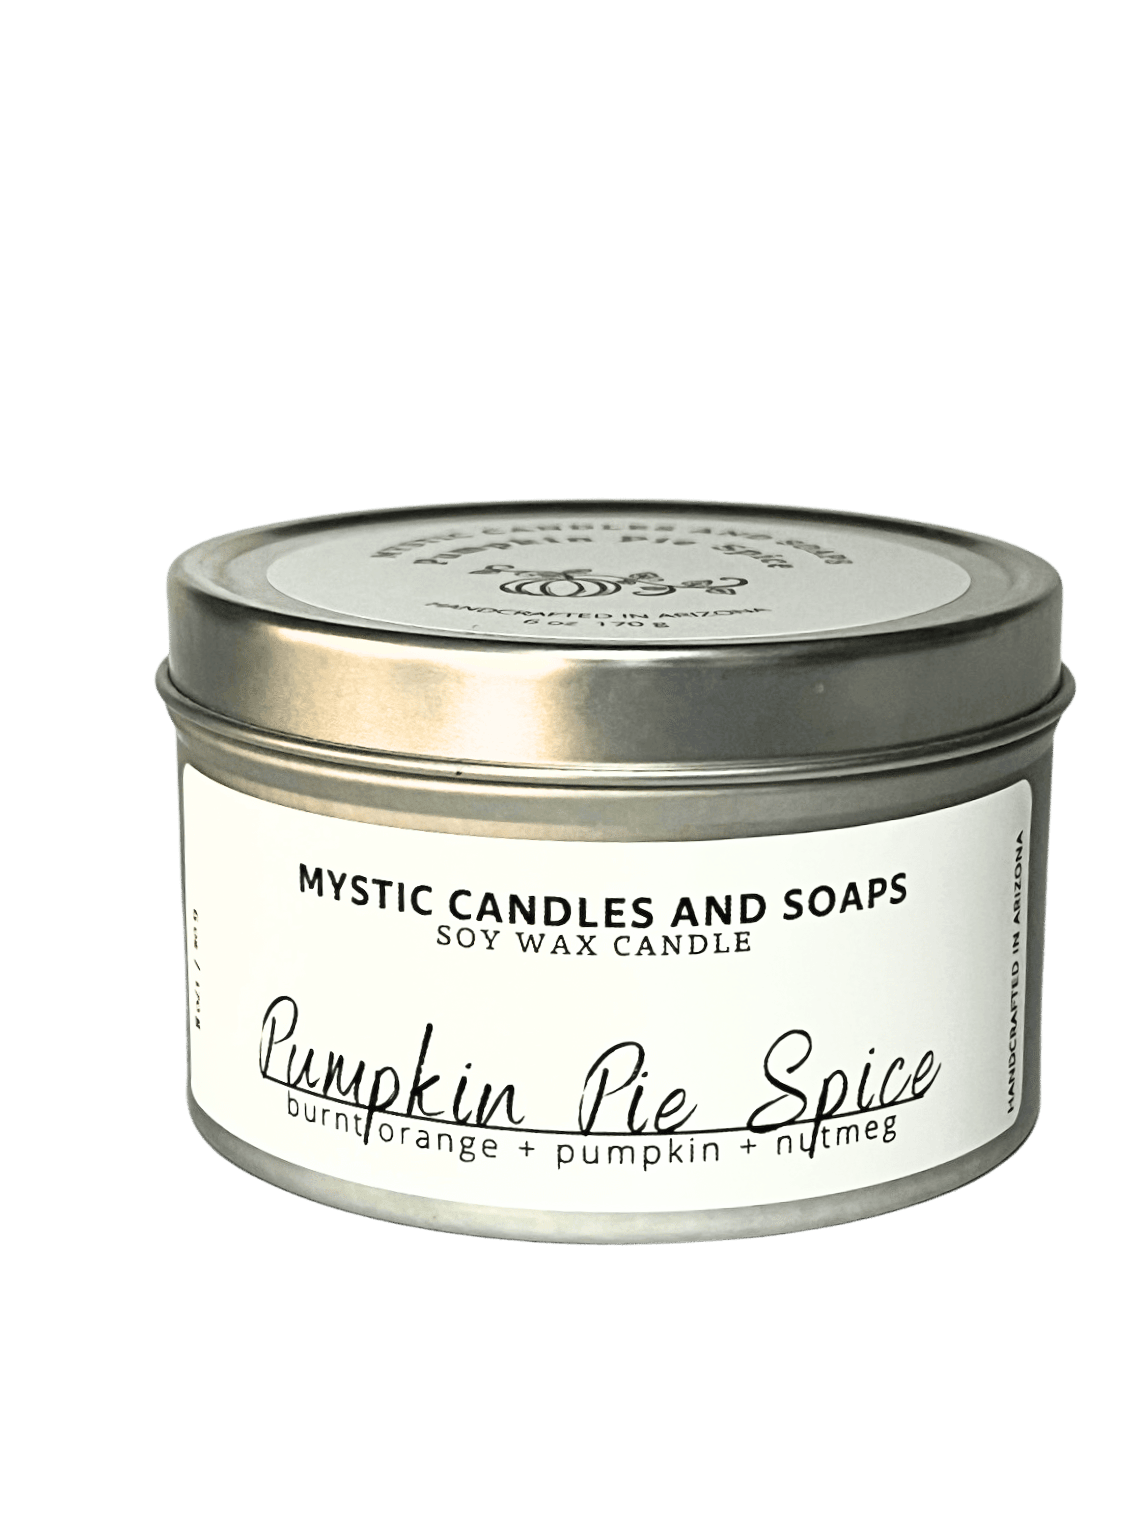 Pumpkin Pie Spice Candle - Mystic Candles and Soaps LLC